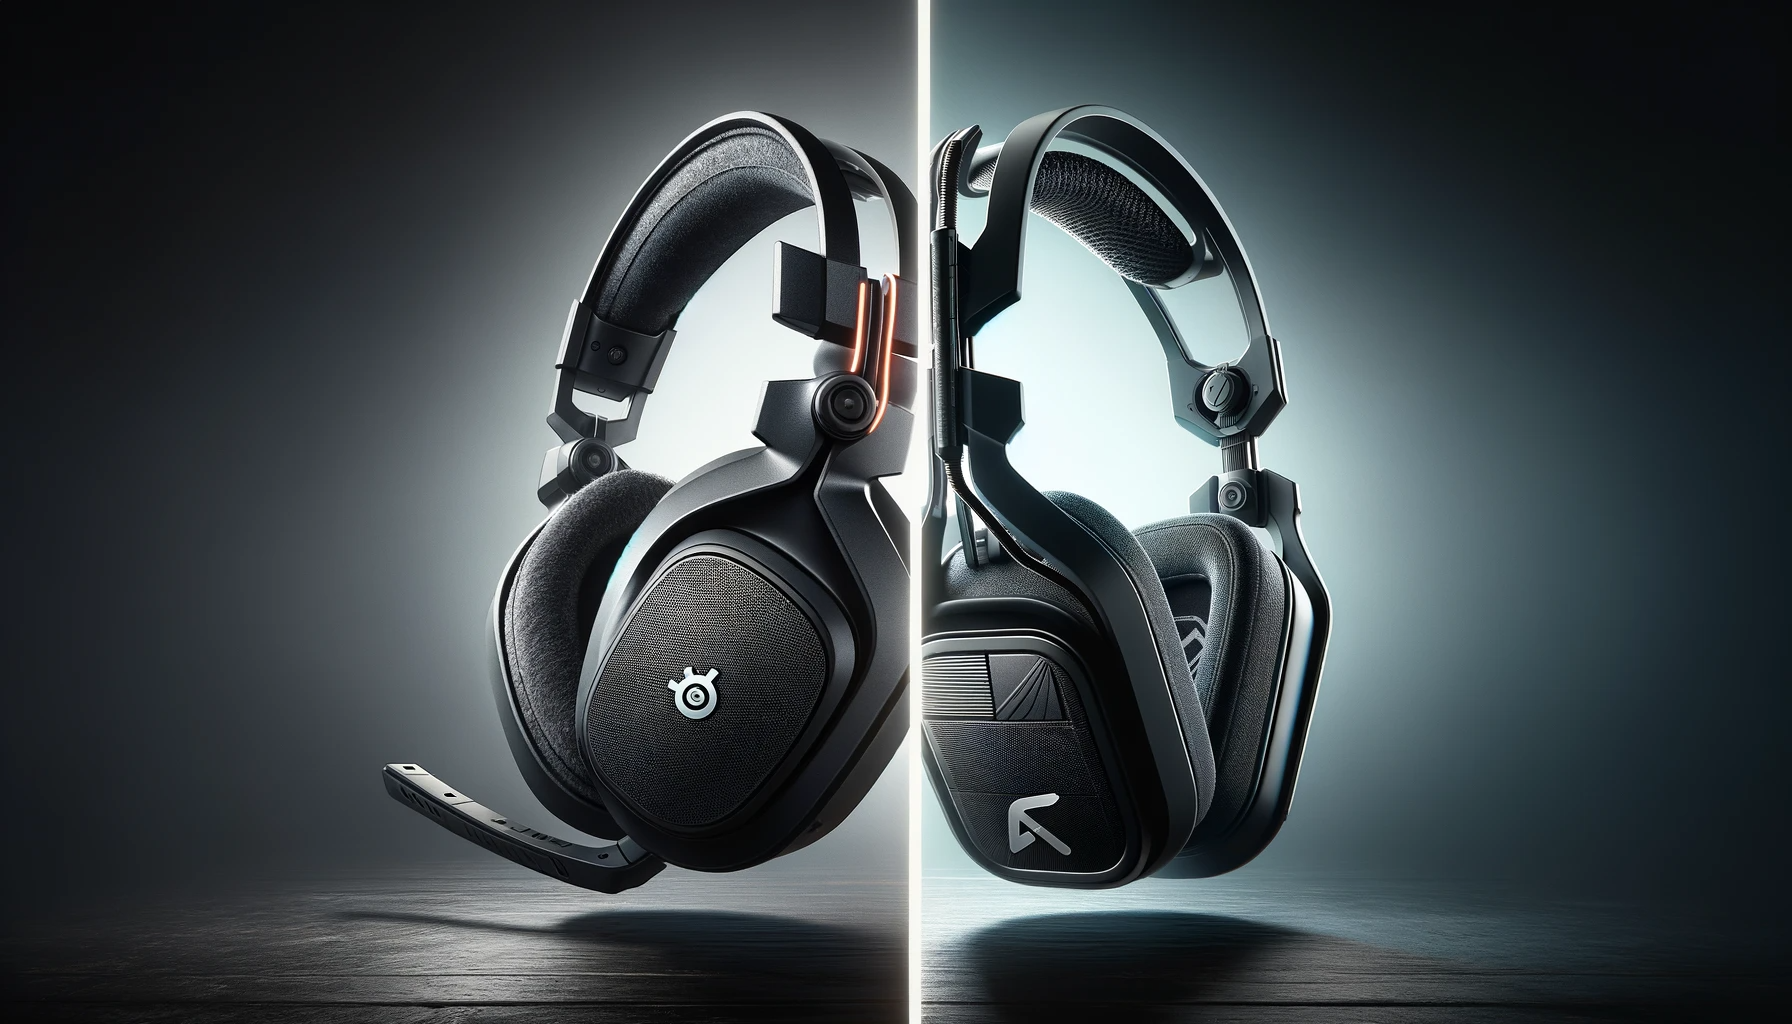 Split-screen image with SteelSeries Arctis 1 Wireless on the left, displaying its sleek, versatile design, and Astro A50 Gen 4 on the right, showcasing its high-tech and distinctive design. Both headsets are shown from angles that highlight their design, material texture, and ear cup comfort.